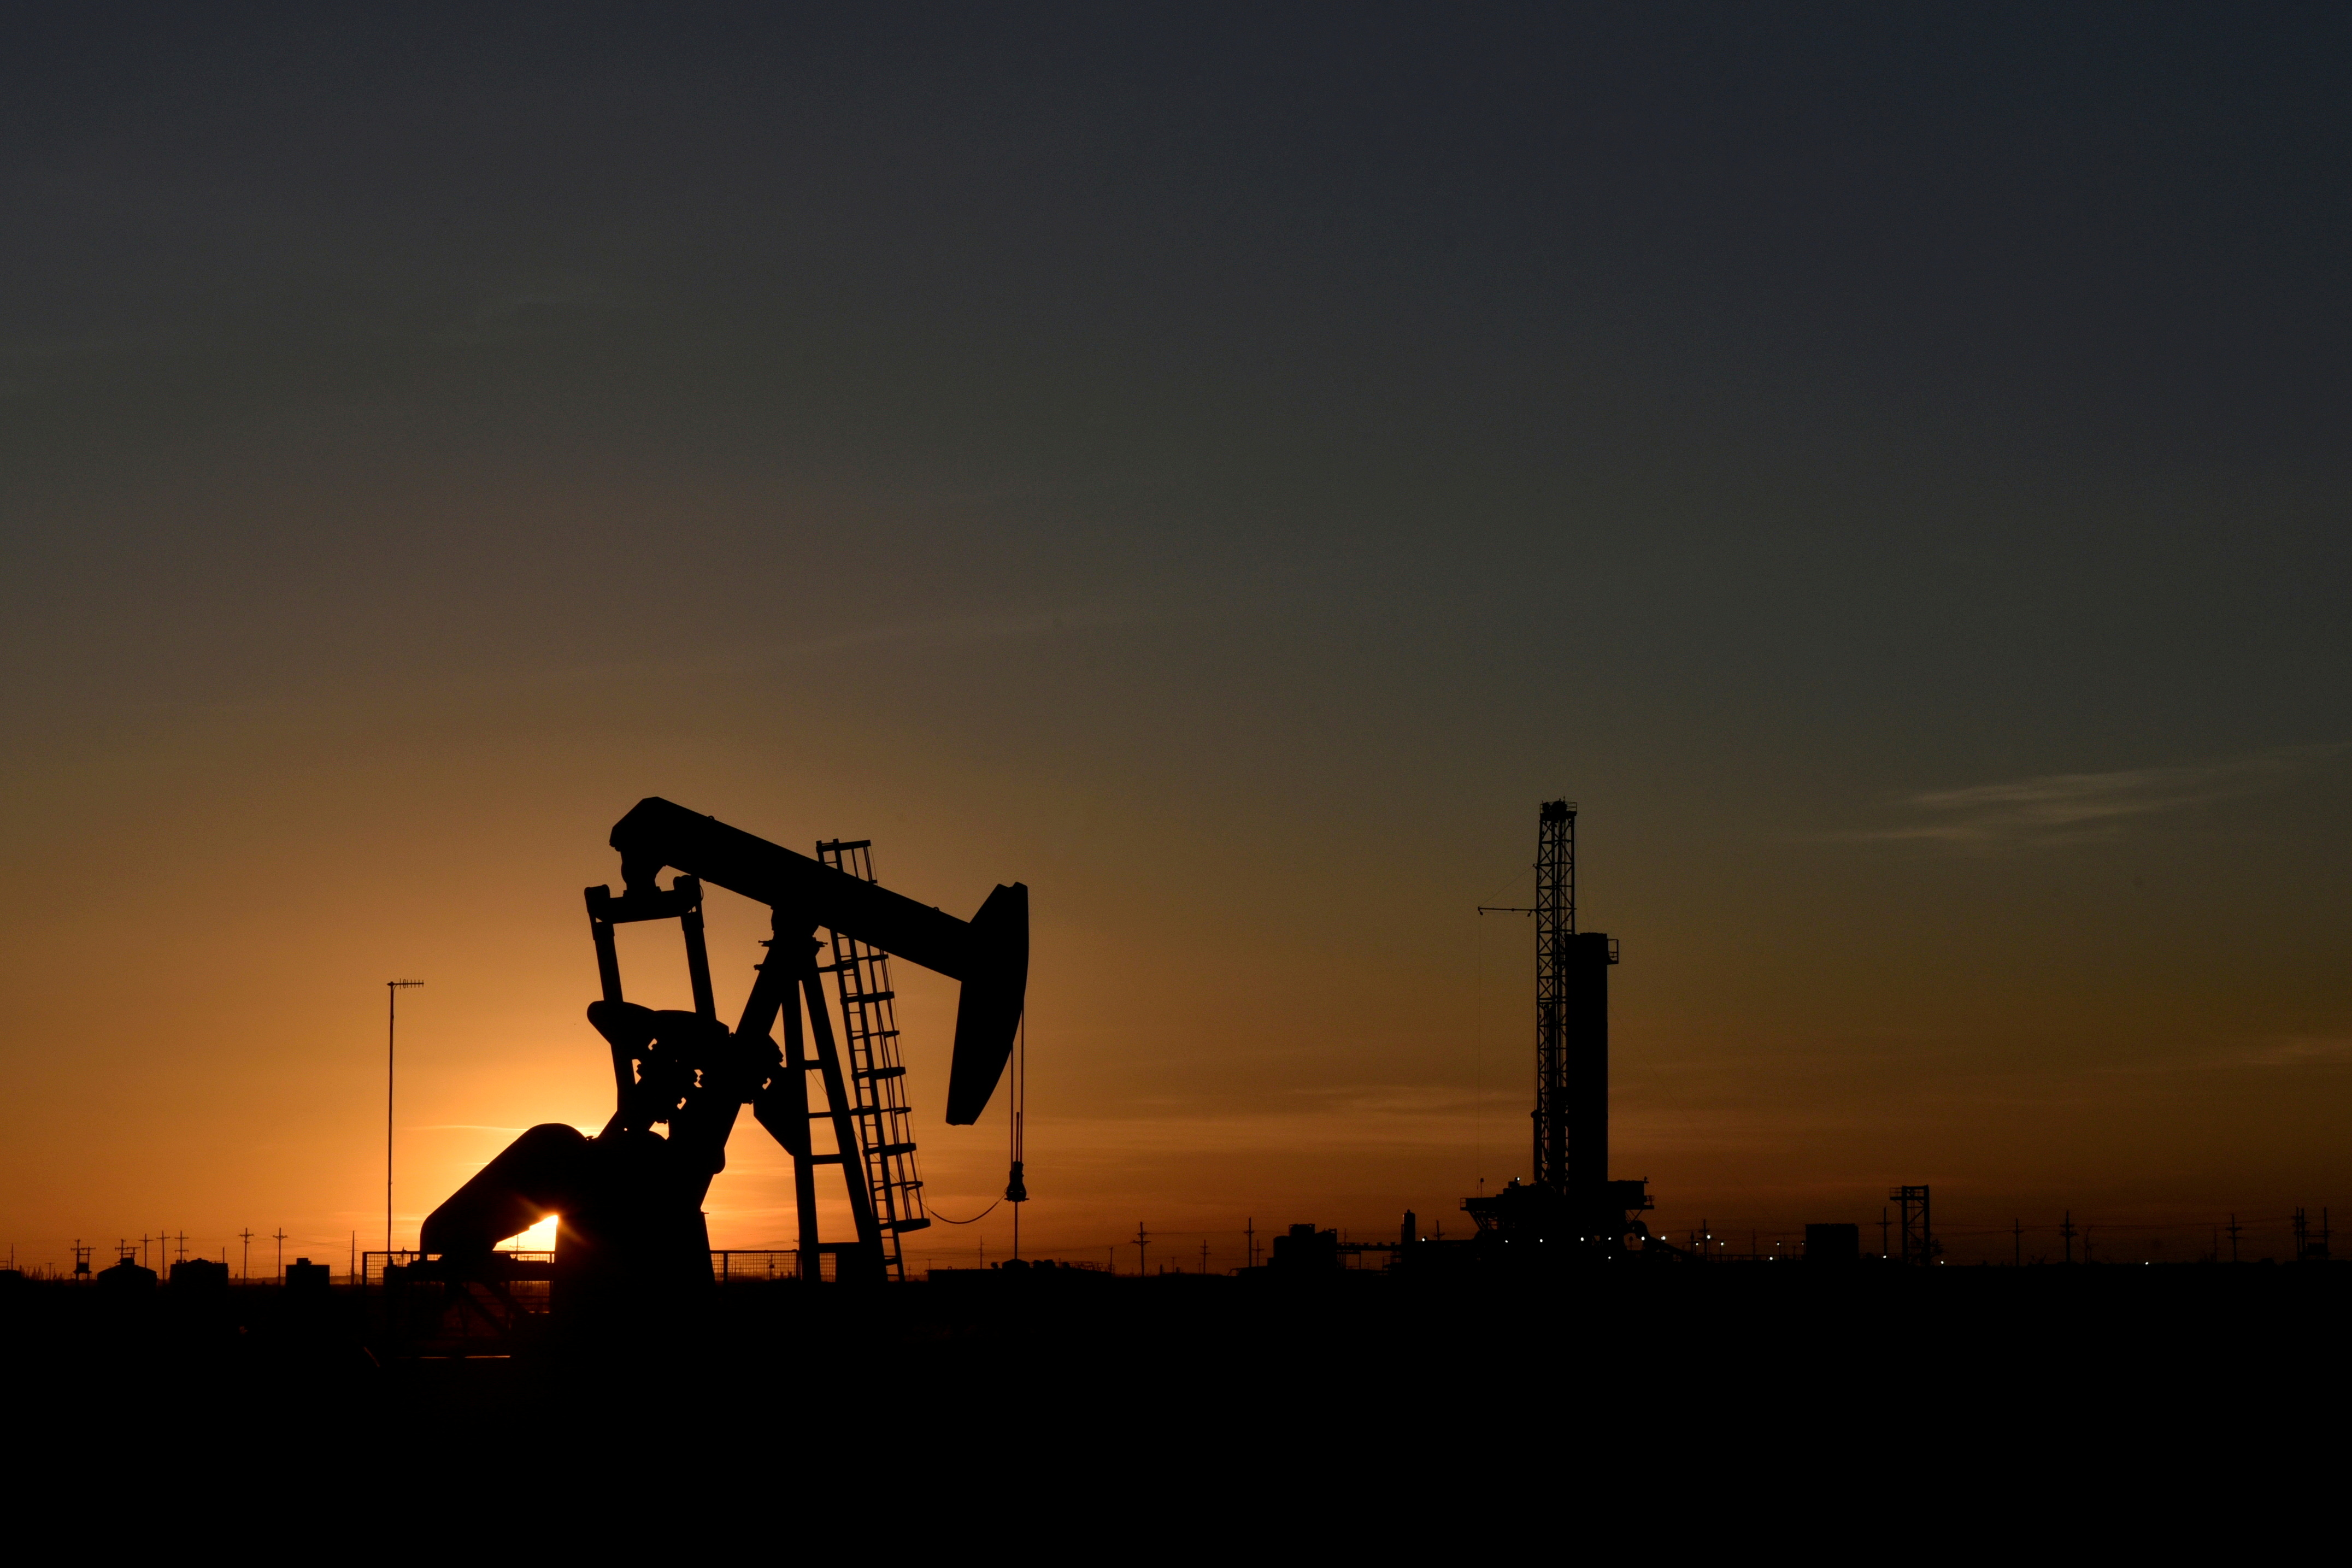 A pump jack operates in front of a drilling rig at sunset in an oil field in Midland, Texas, U.S.